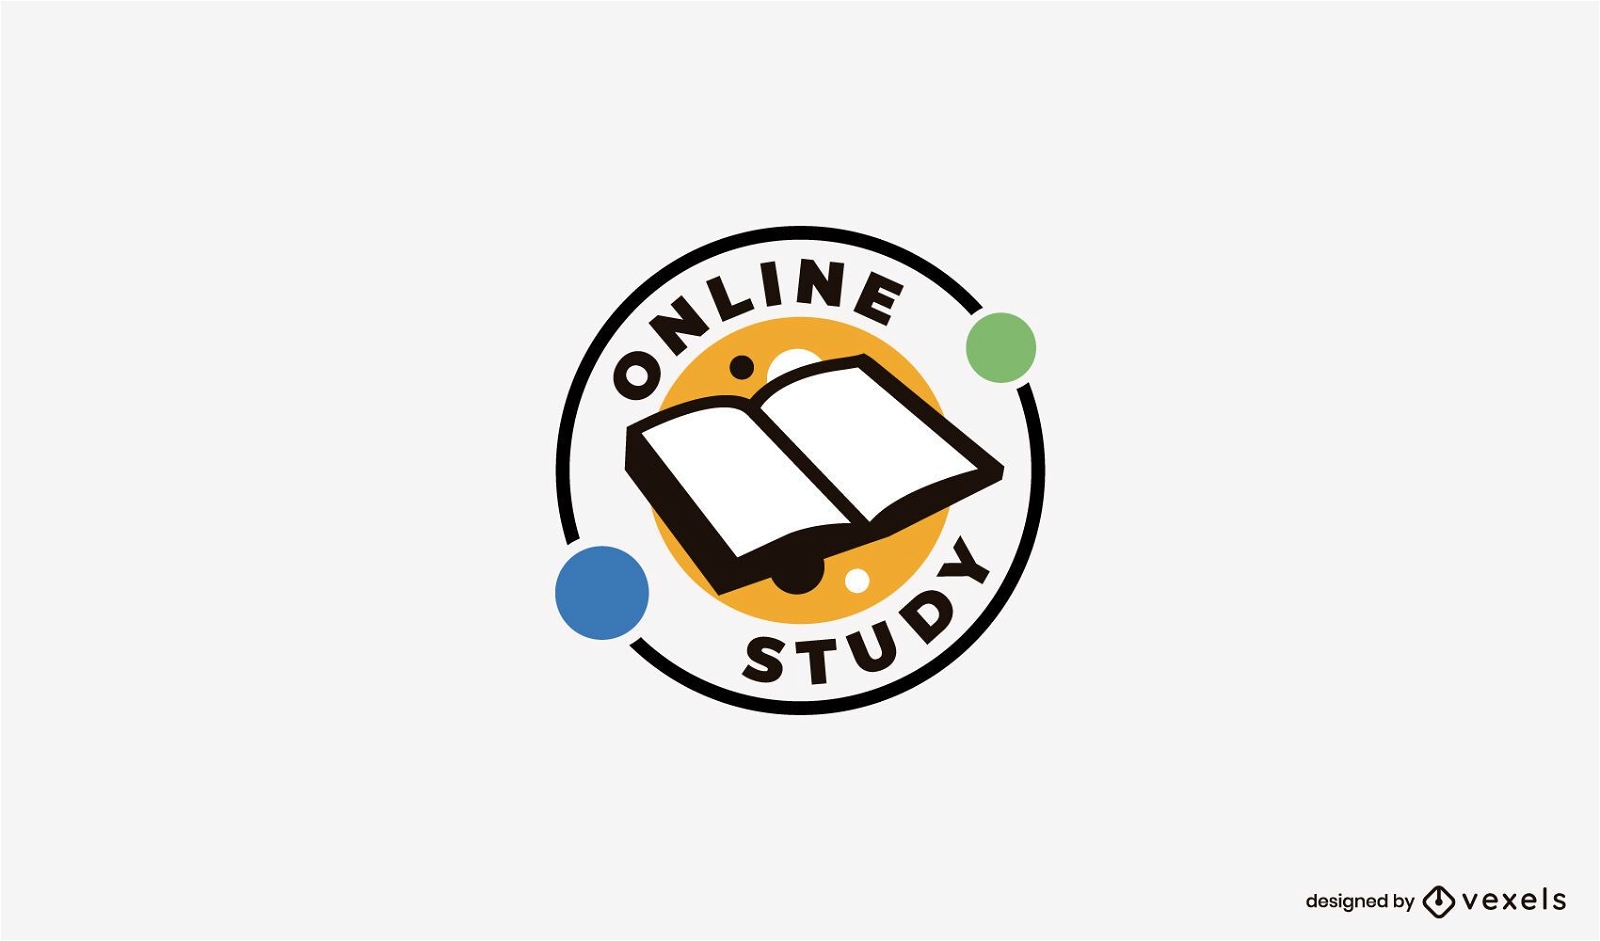 Share more than 130 group study logo latest